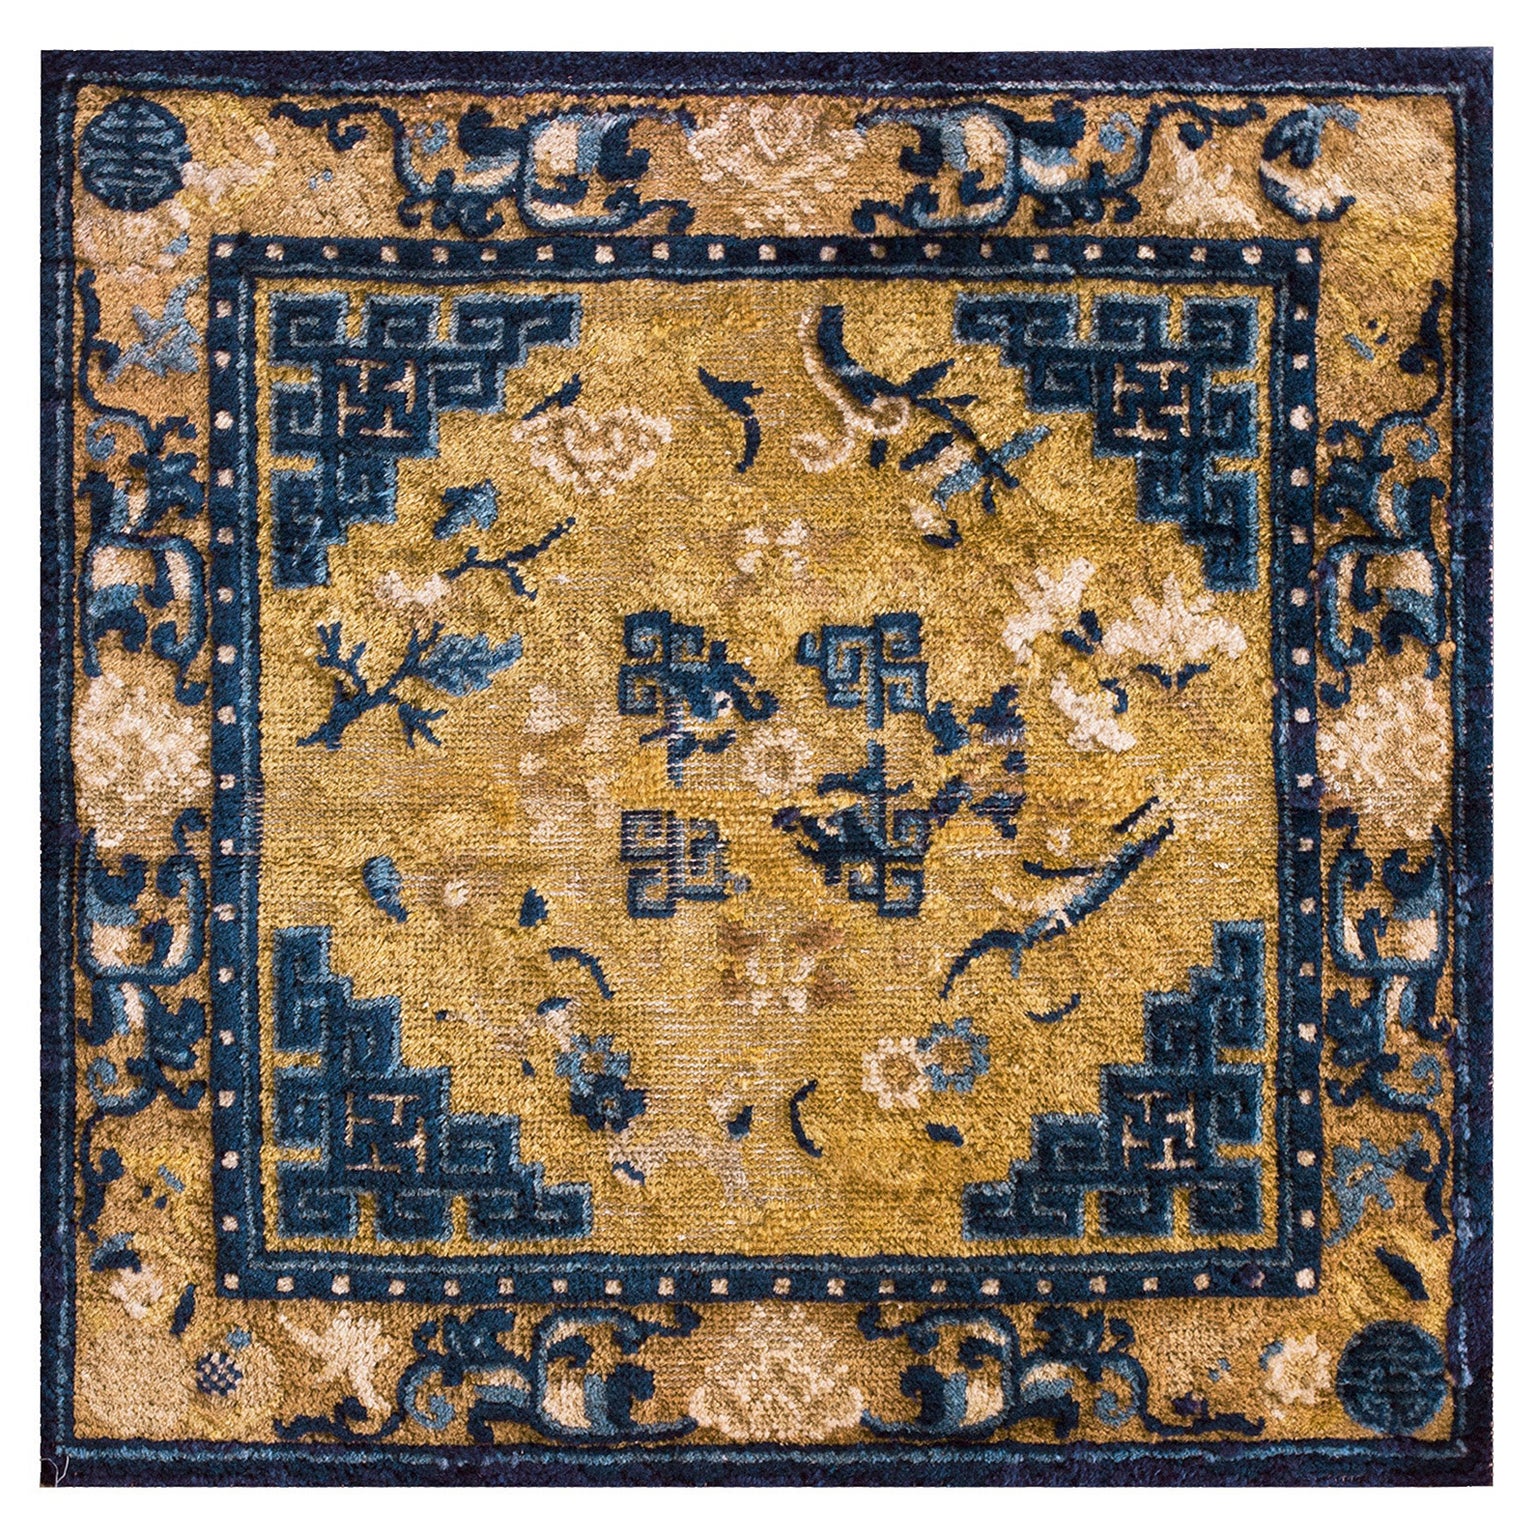 Mid 19th Century W. Chinese Ningxia Rug ( 2'4" x 2'4" - 70 x 70 ) For Sale